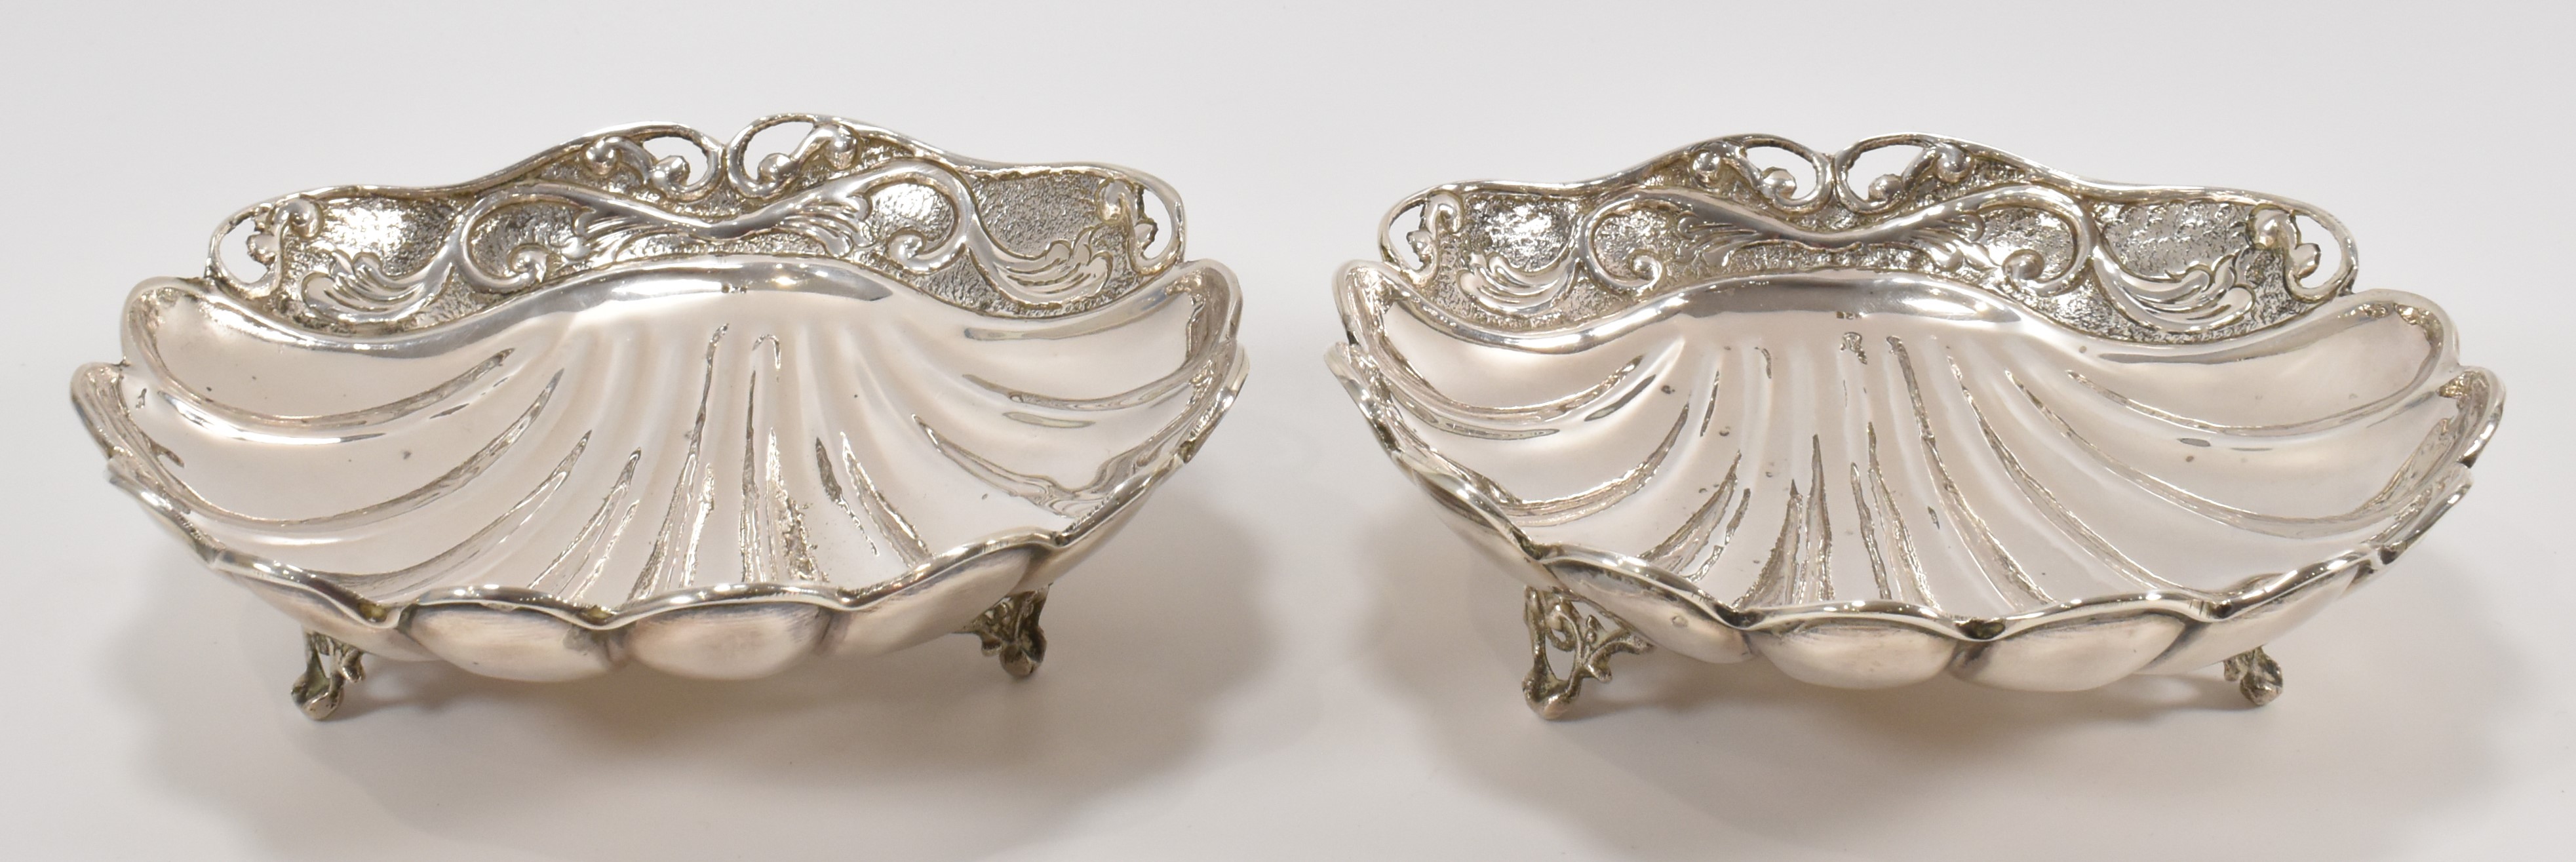 PAIR OF SILVER SCALLOP SHELL BOWLS